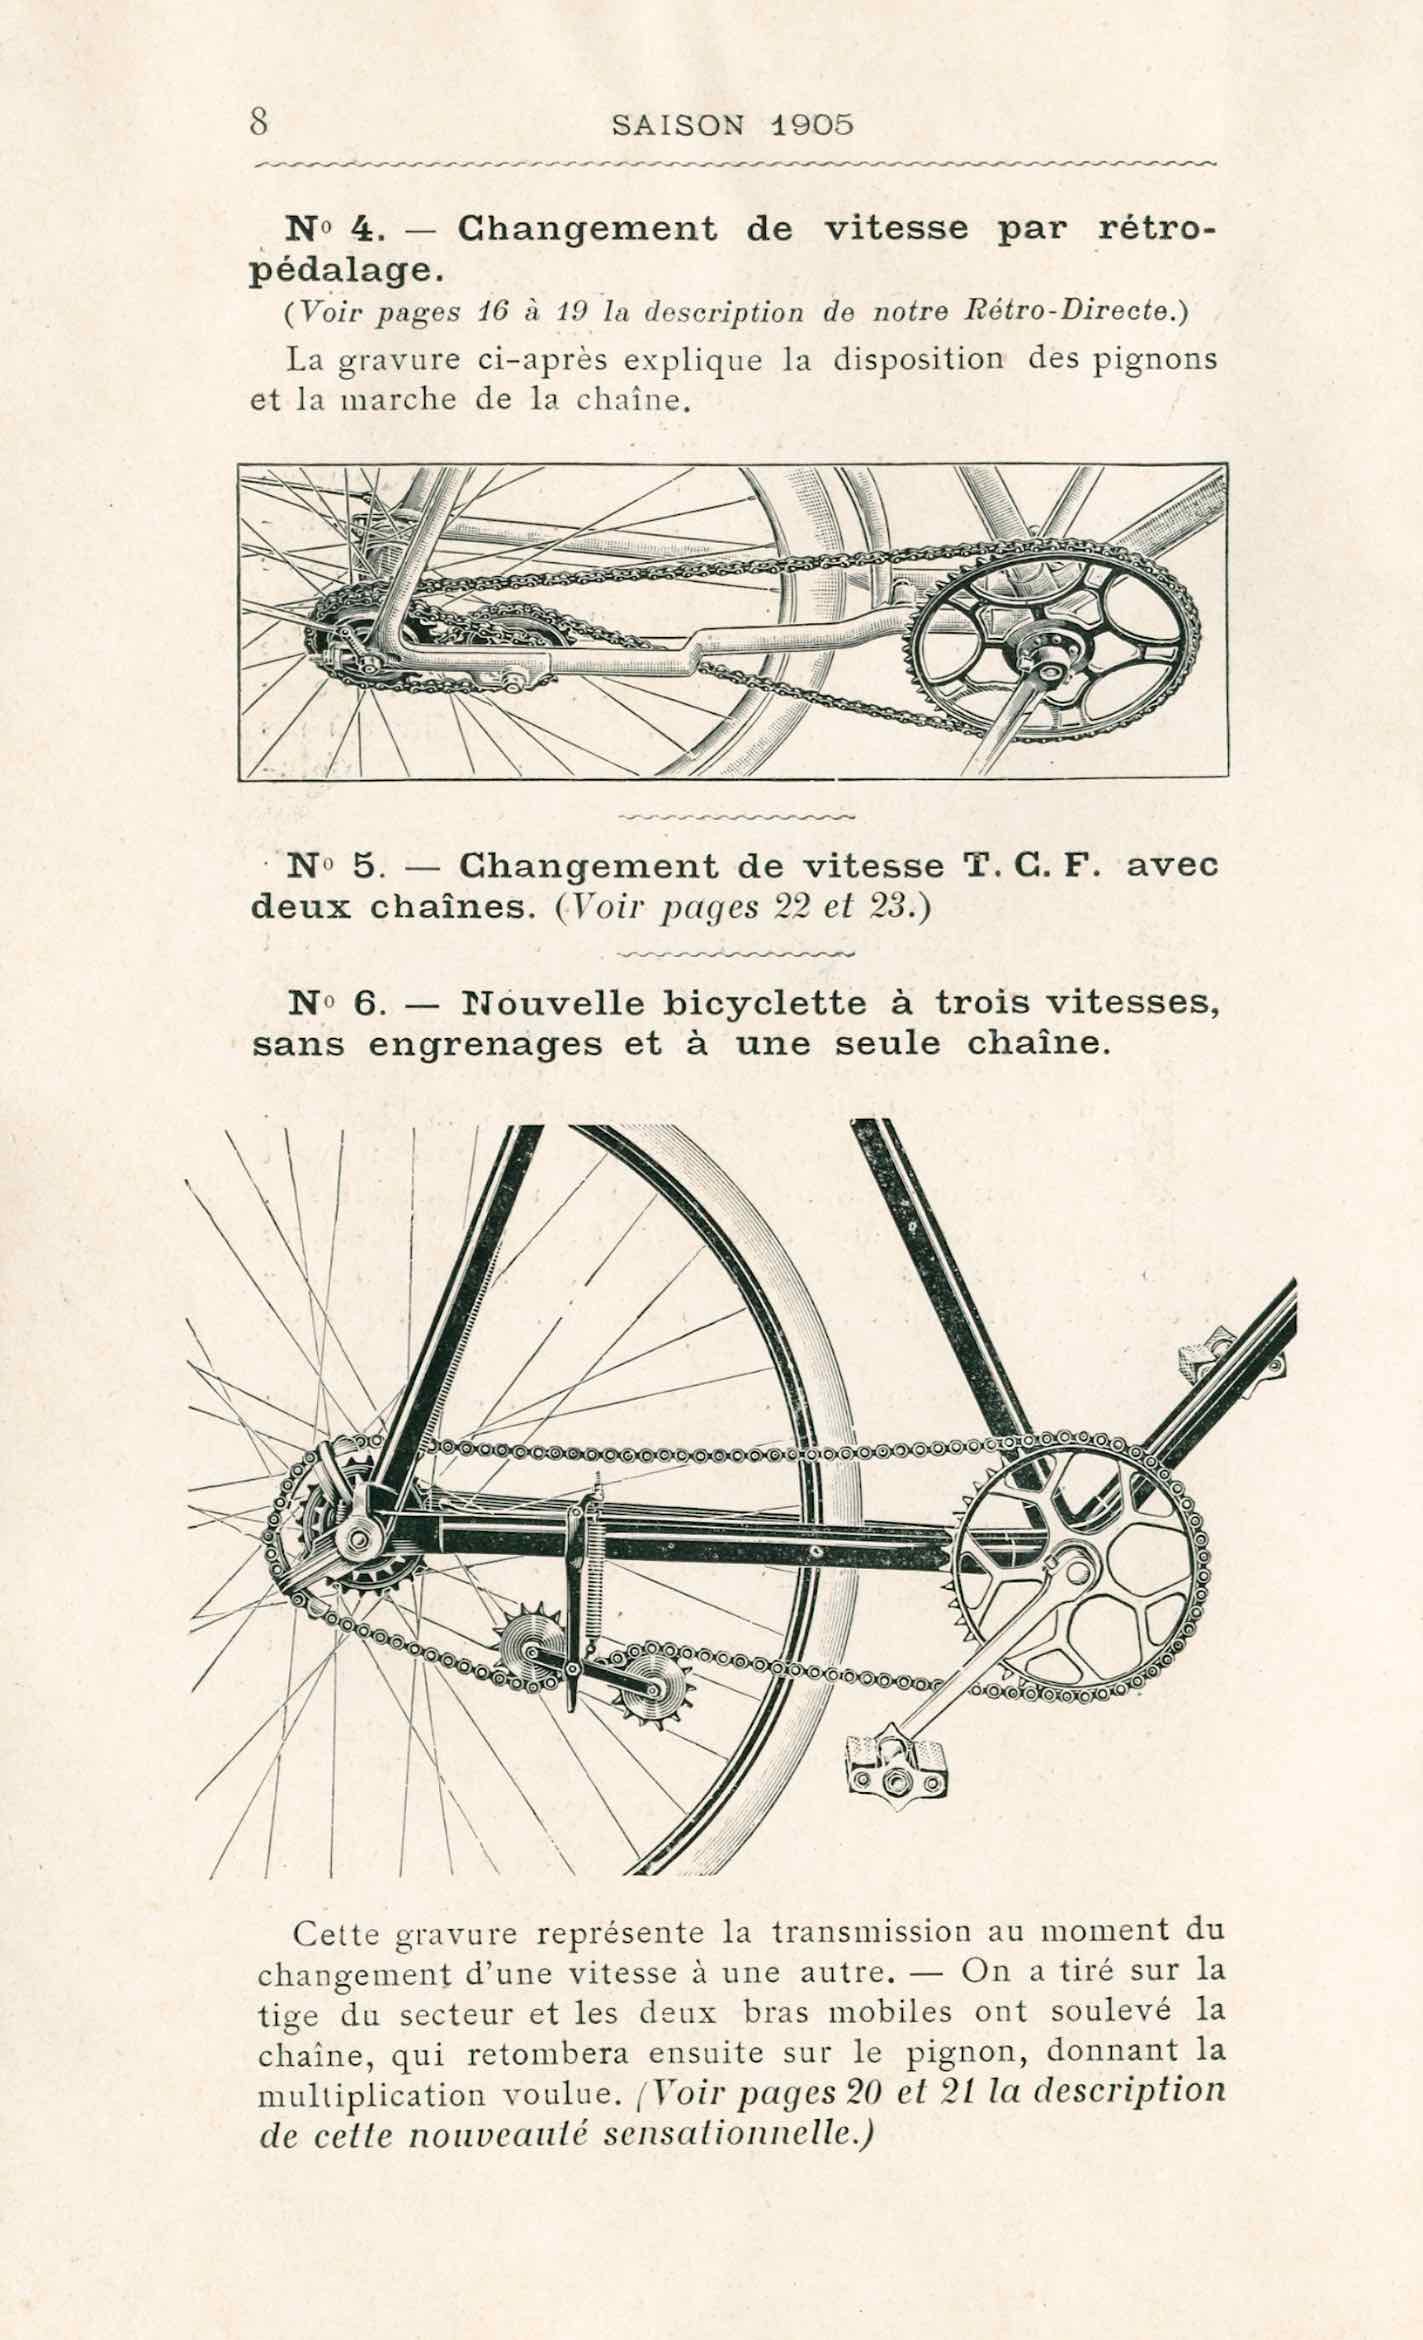 Terrot & Cie - Cycles & Motorcyclettes 1905 page 8 main image